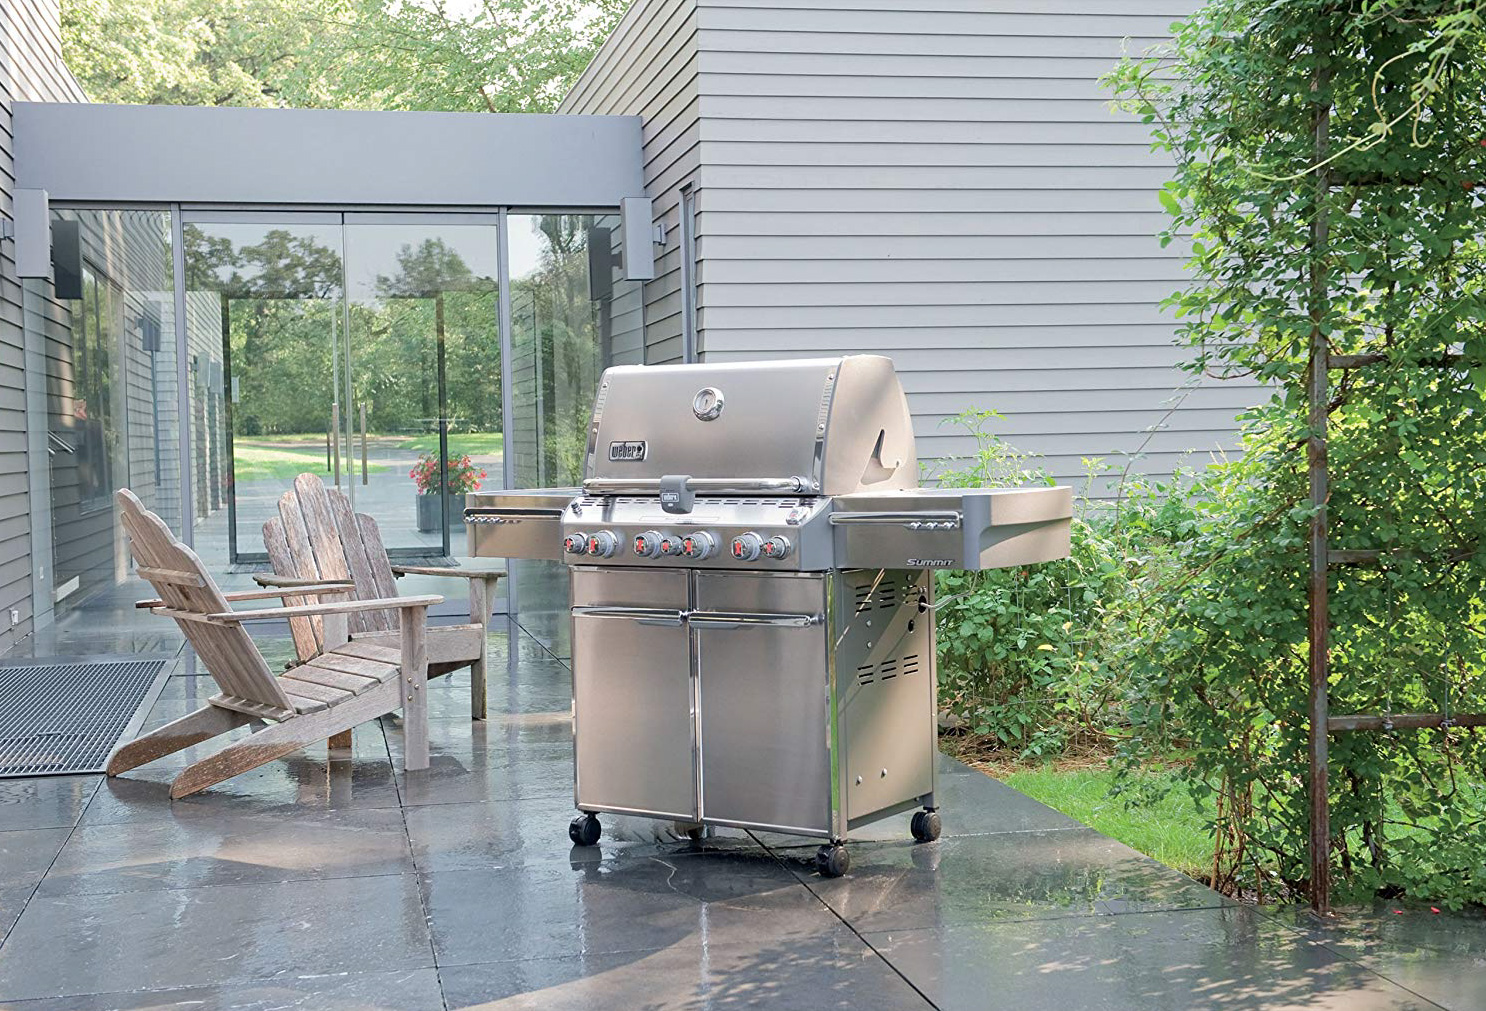 How to Connect a Weber Natural Gas Grill to Your Gas Line – Natural Gas Grill Hookup Guide